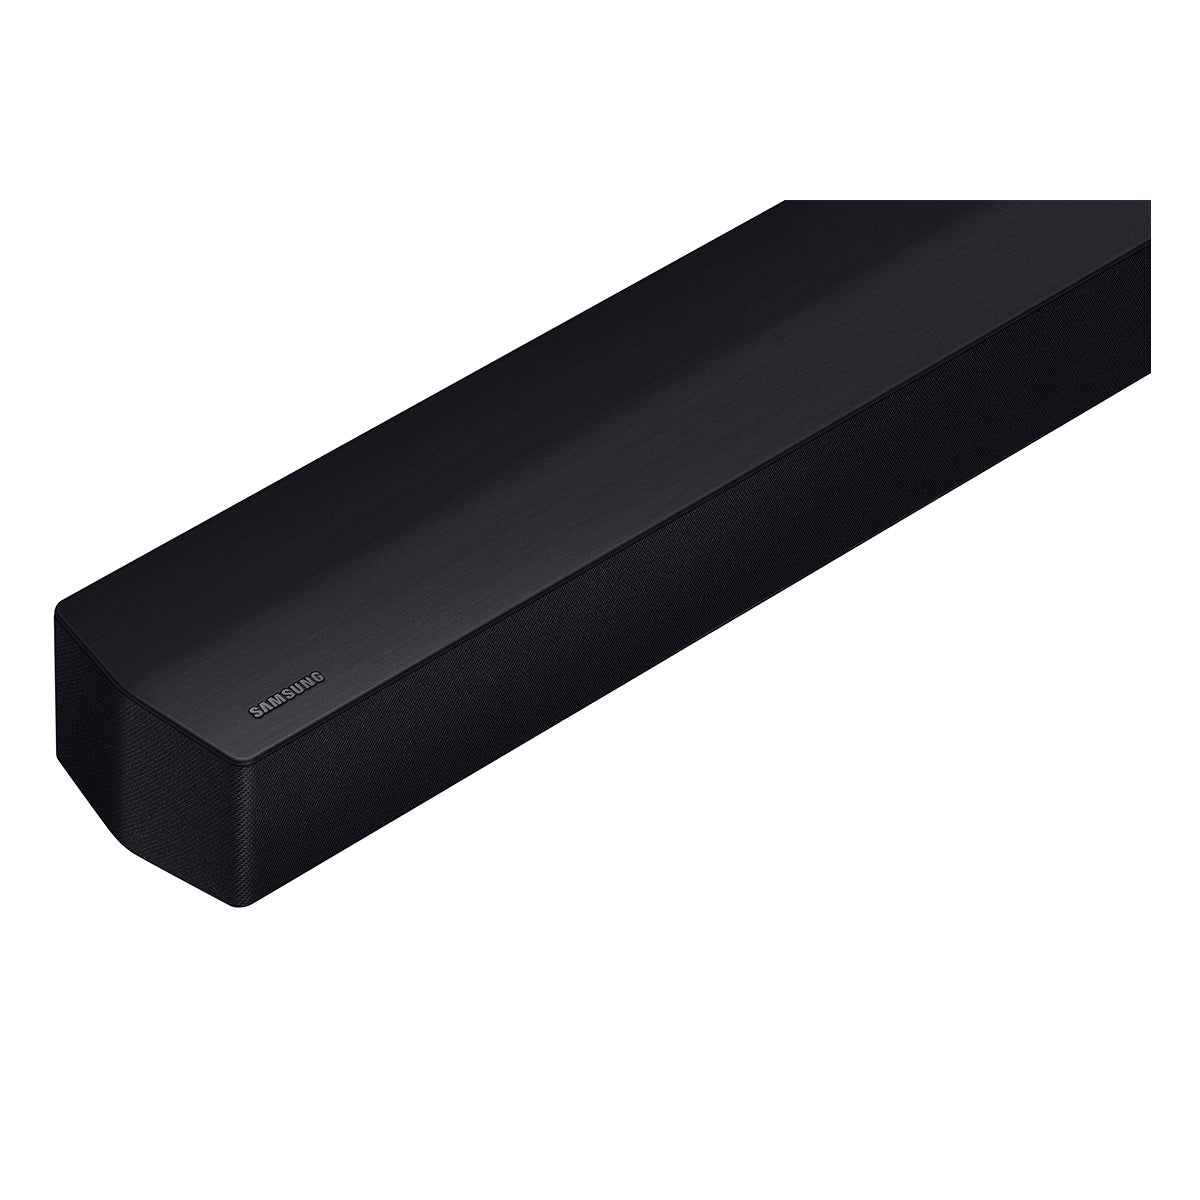 Samsung HW-C450ZA 2.1 Ch (2023) and Subwoofer, Wide Boost, Wireless Soundbar | Bass Virtual:X with DTS World Stereo